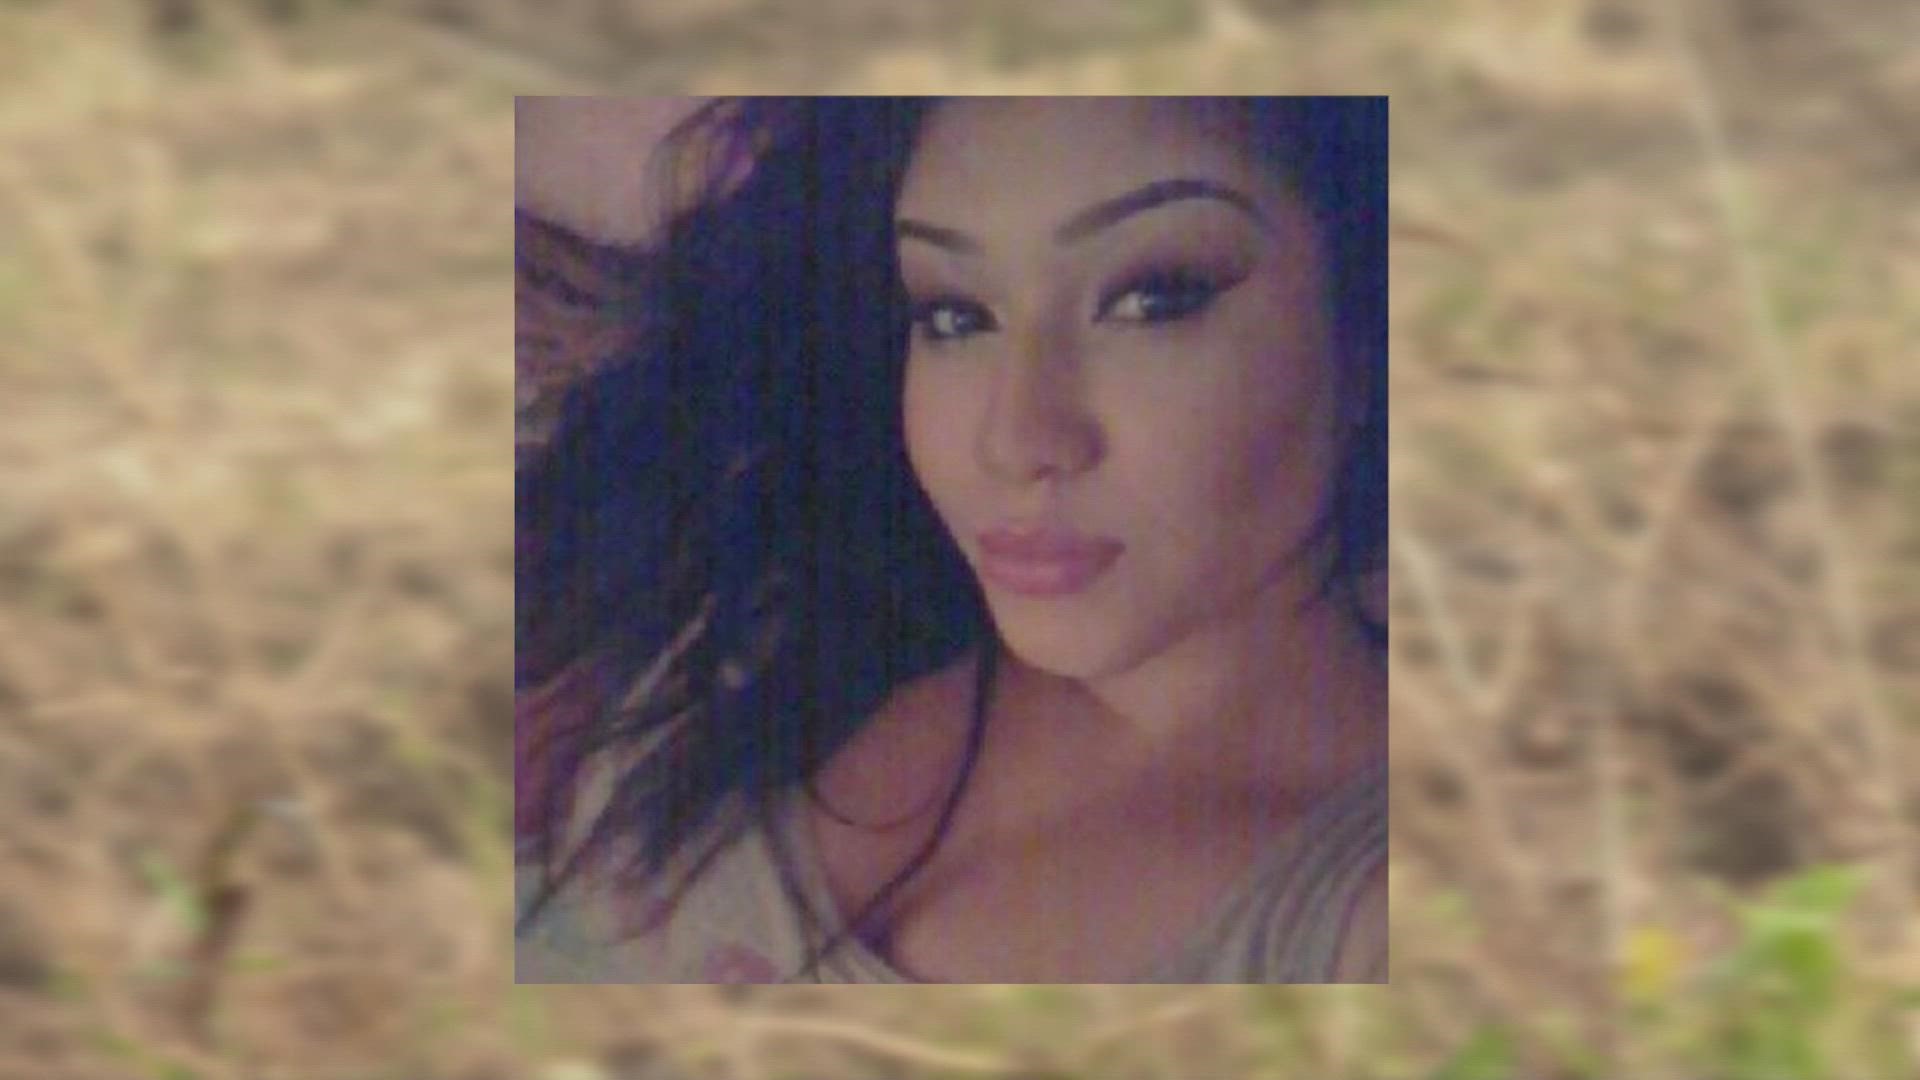 The body of Lorraine Diaz was found in Richmond in 2017. In November, her boyfriend was arrested and charged with murder.